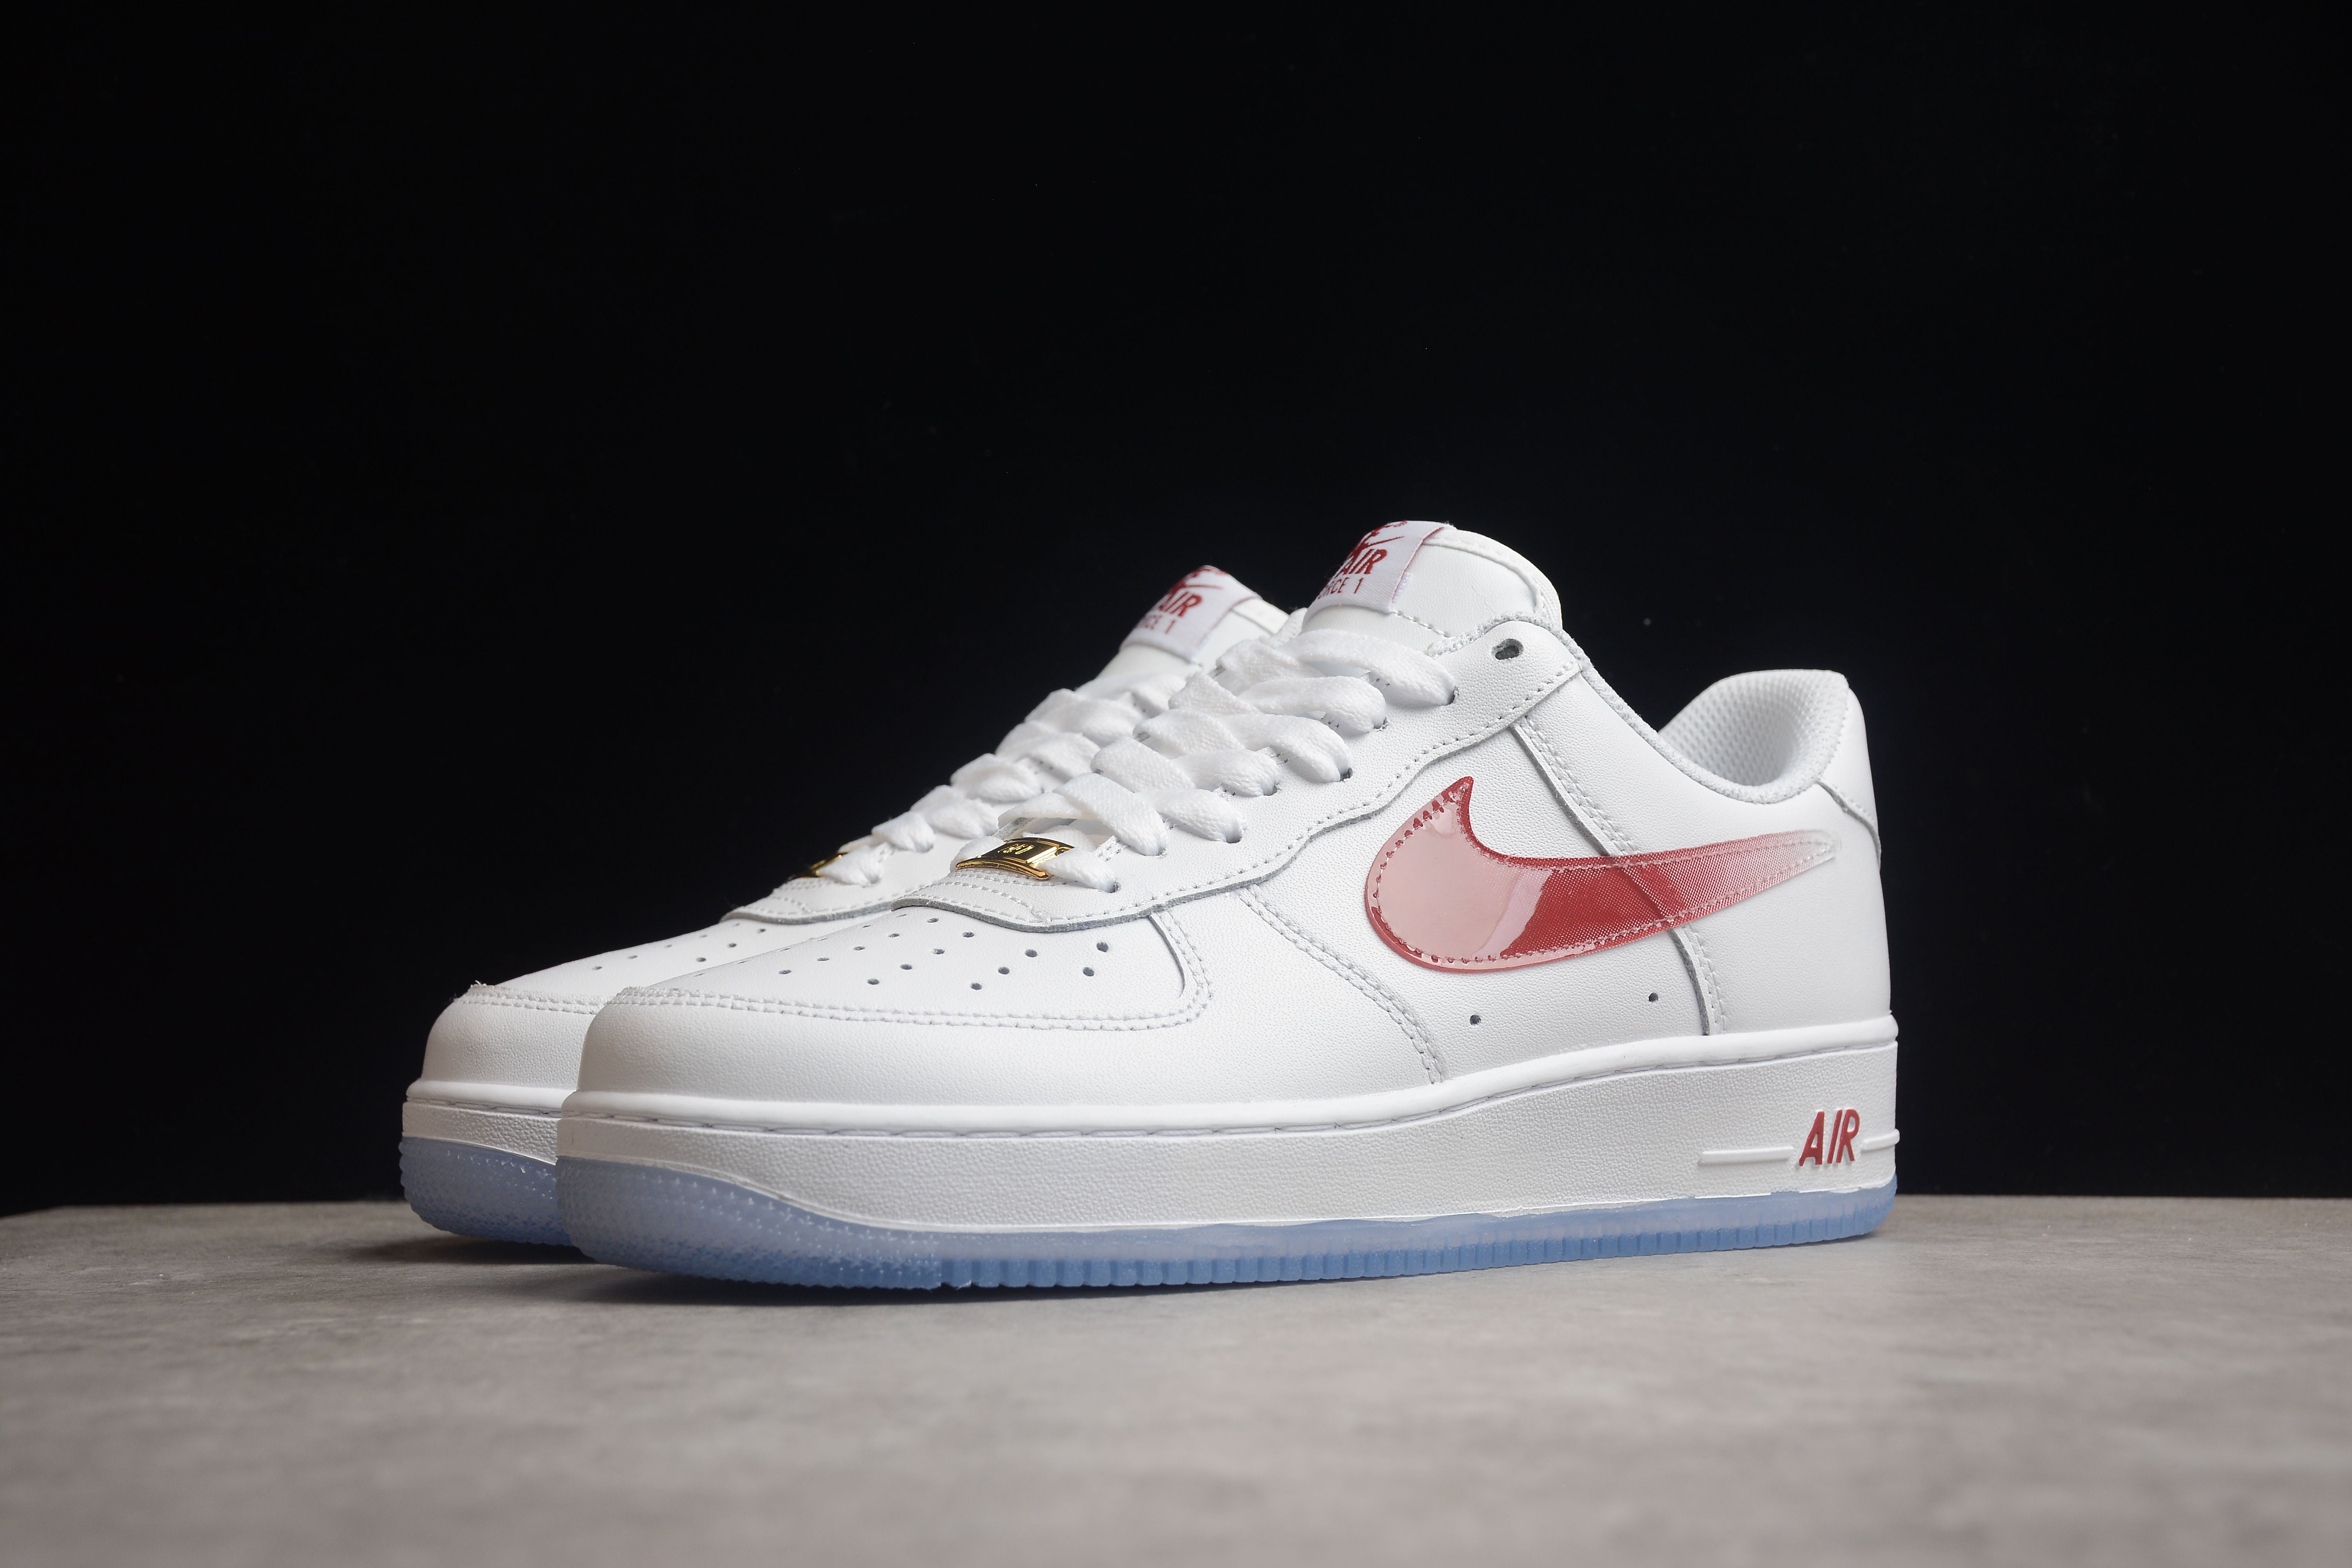 Nike airforce A1 red tick shoes